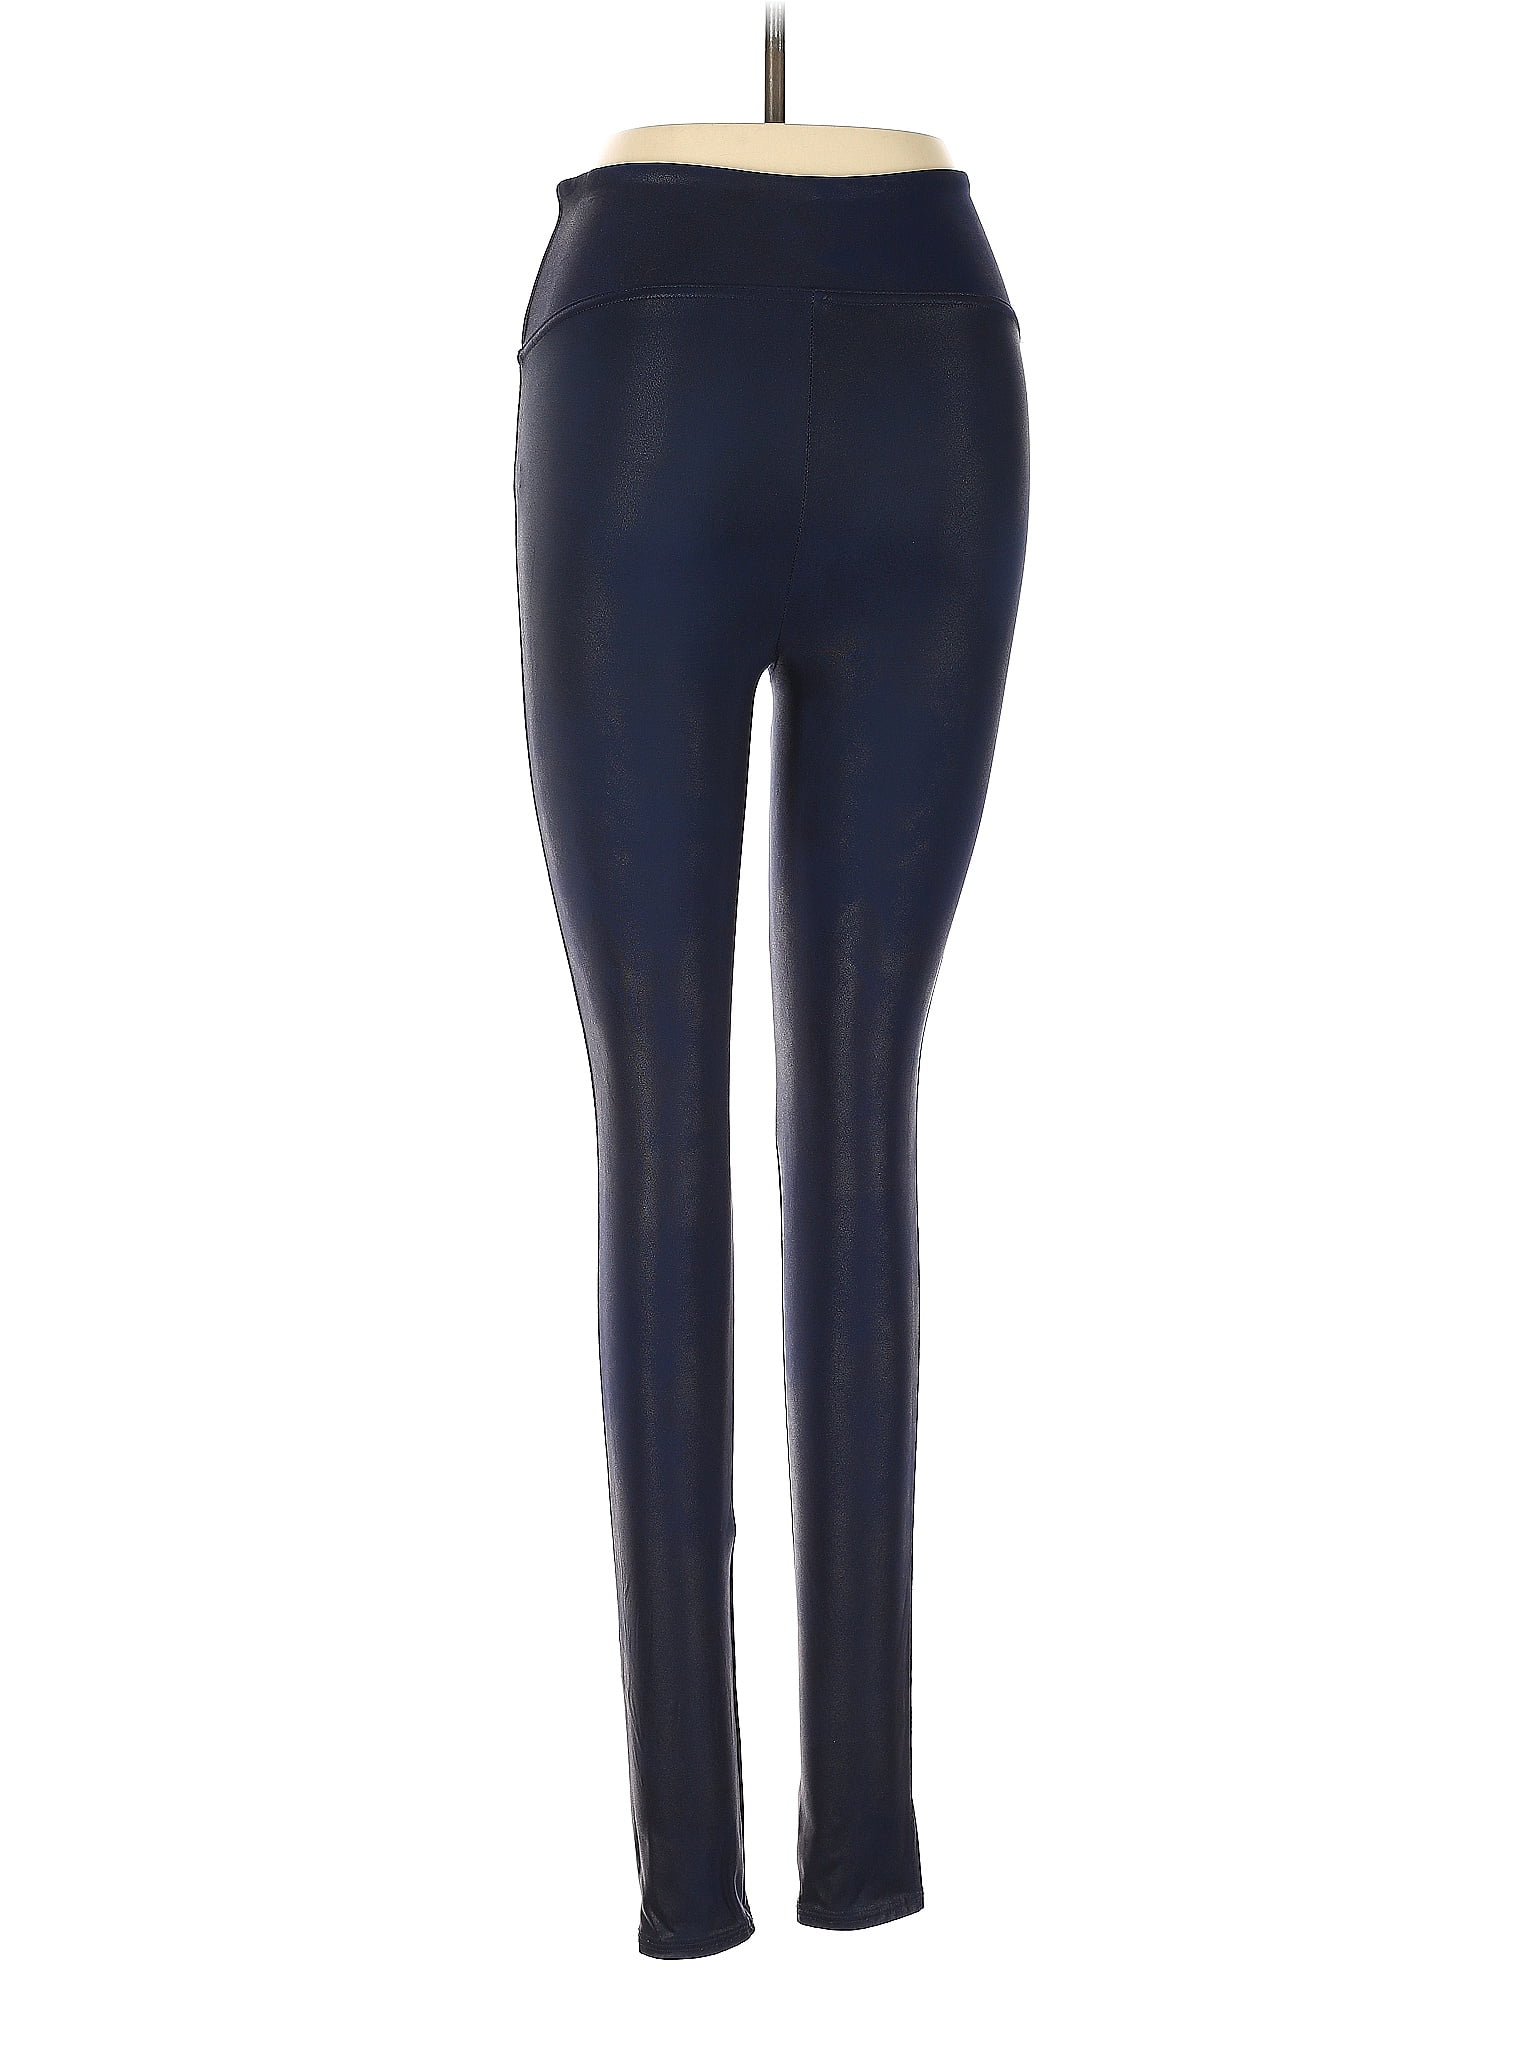 Assets by Spanx Faux Leather Shaping Leggings Womens Large Sea Blue